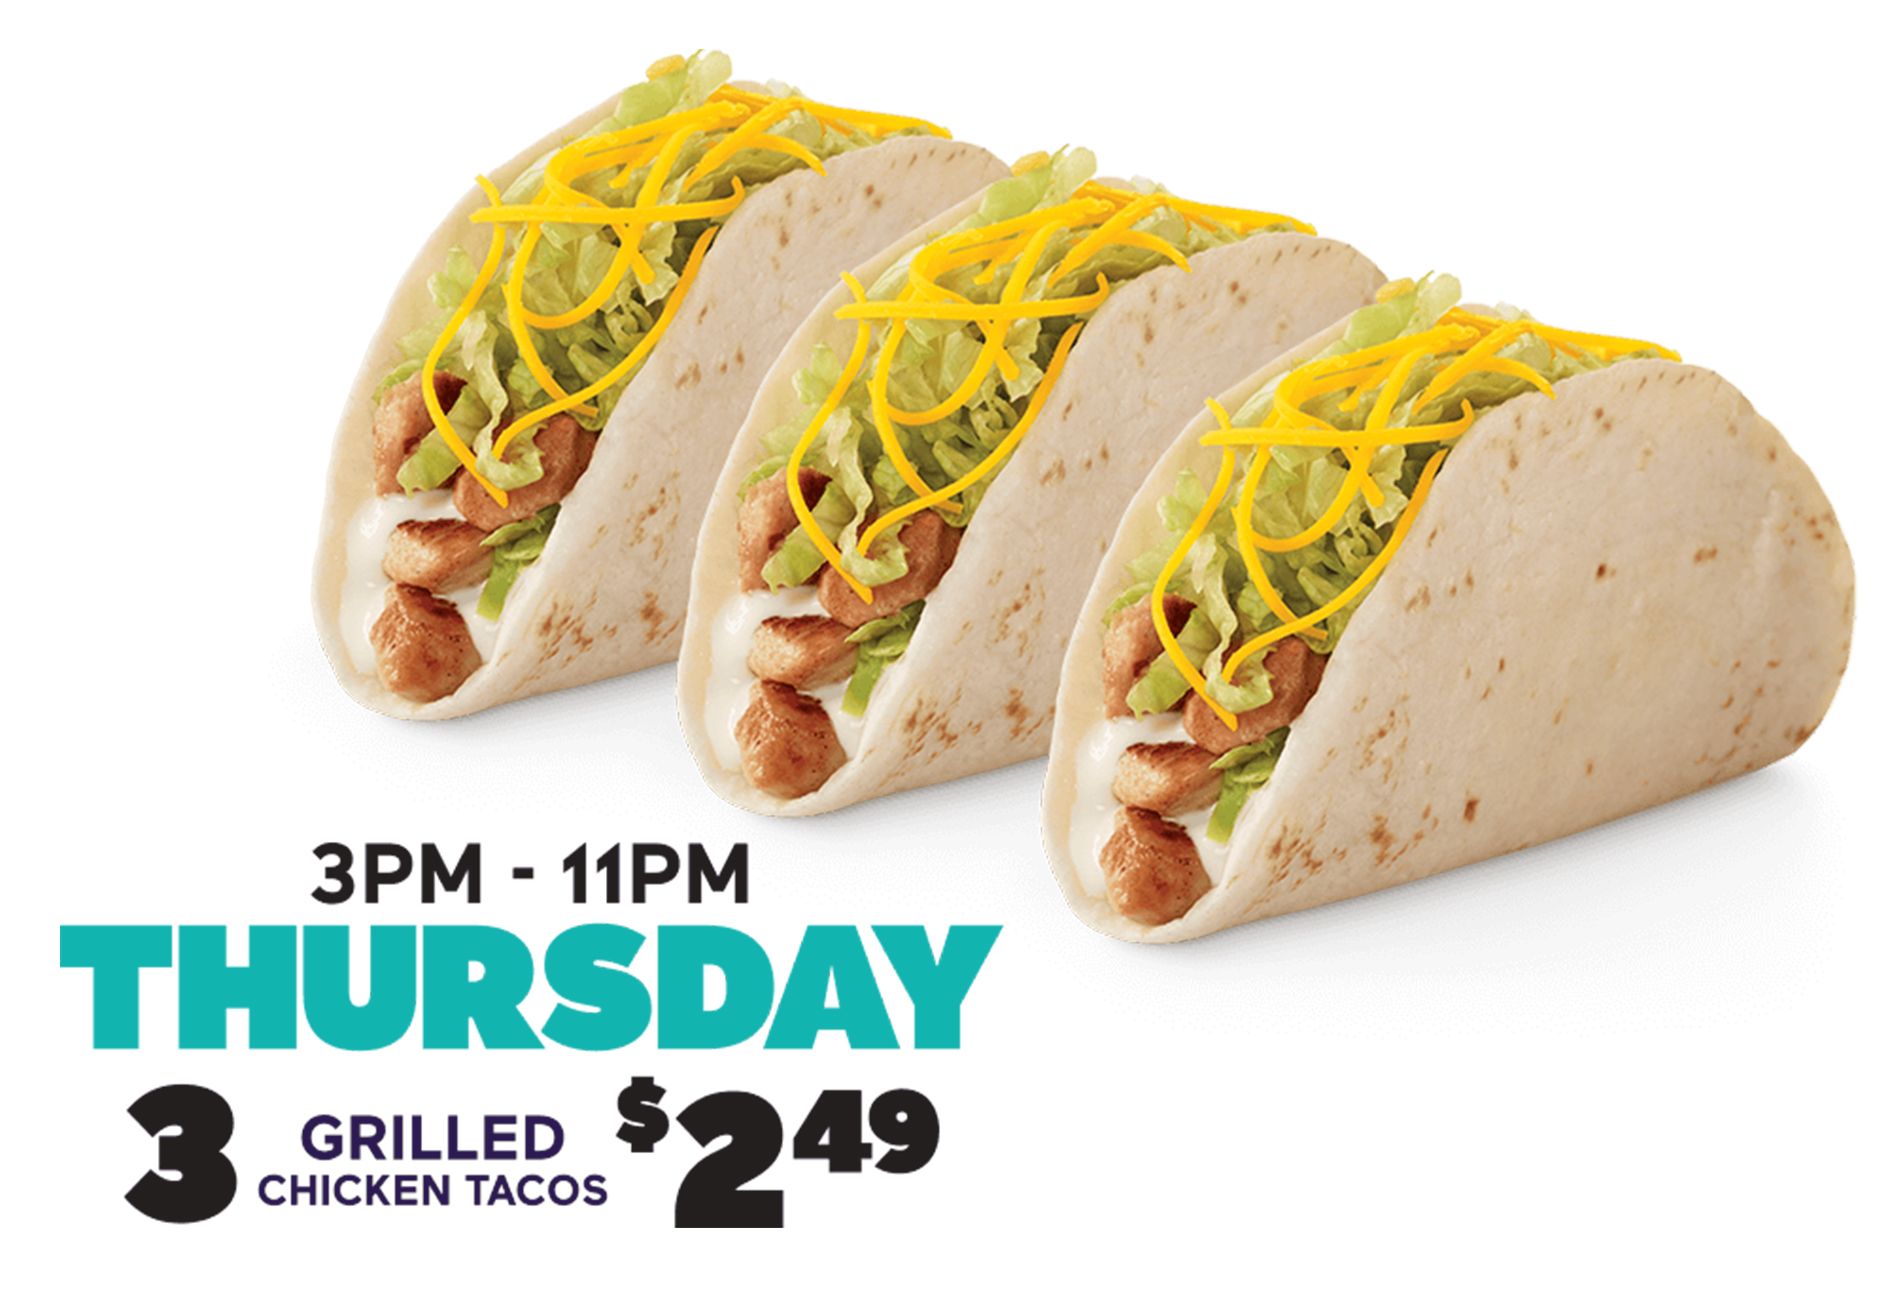 Receive 3 Grilled Chicken Tacos for $2.49 Every Thursday from 3 to 11 pm at Del Taco